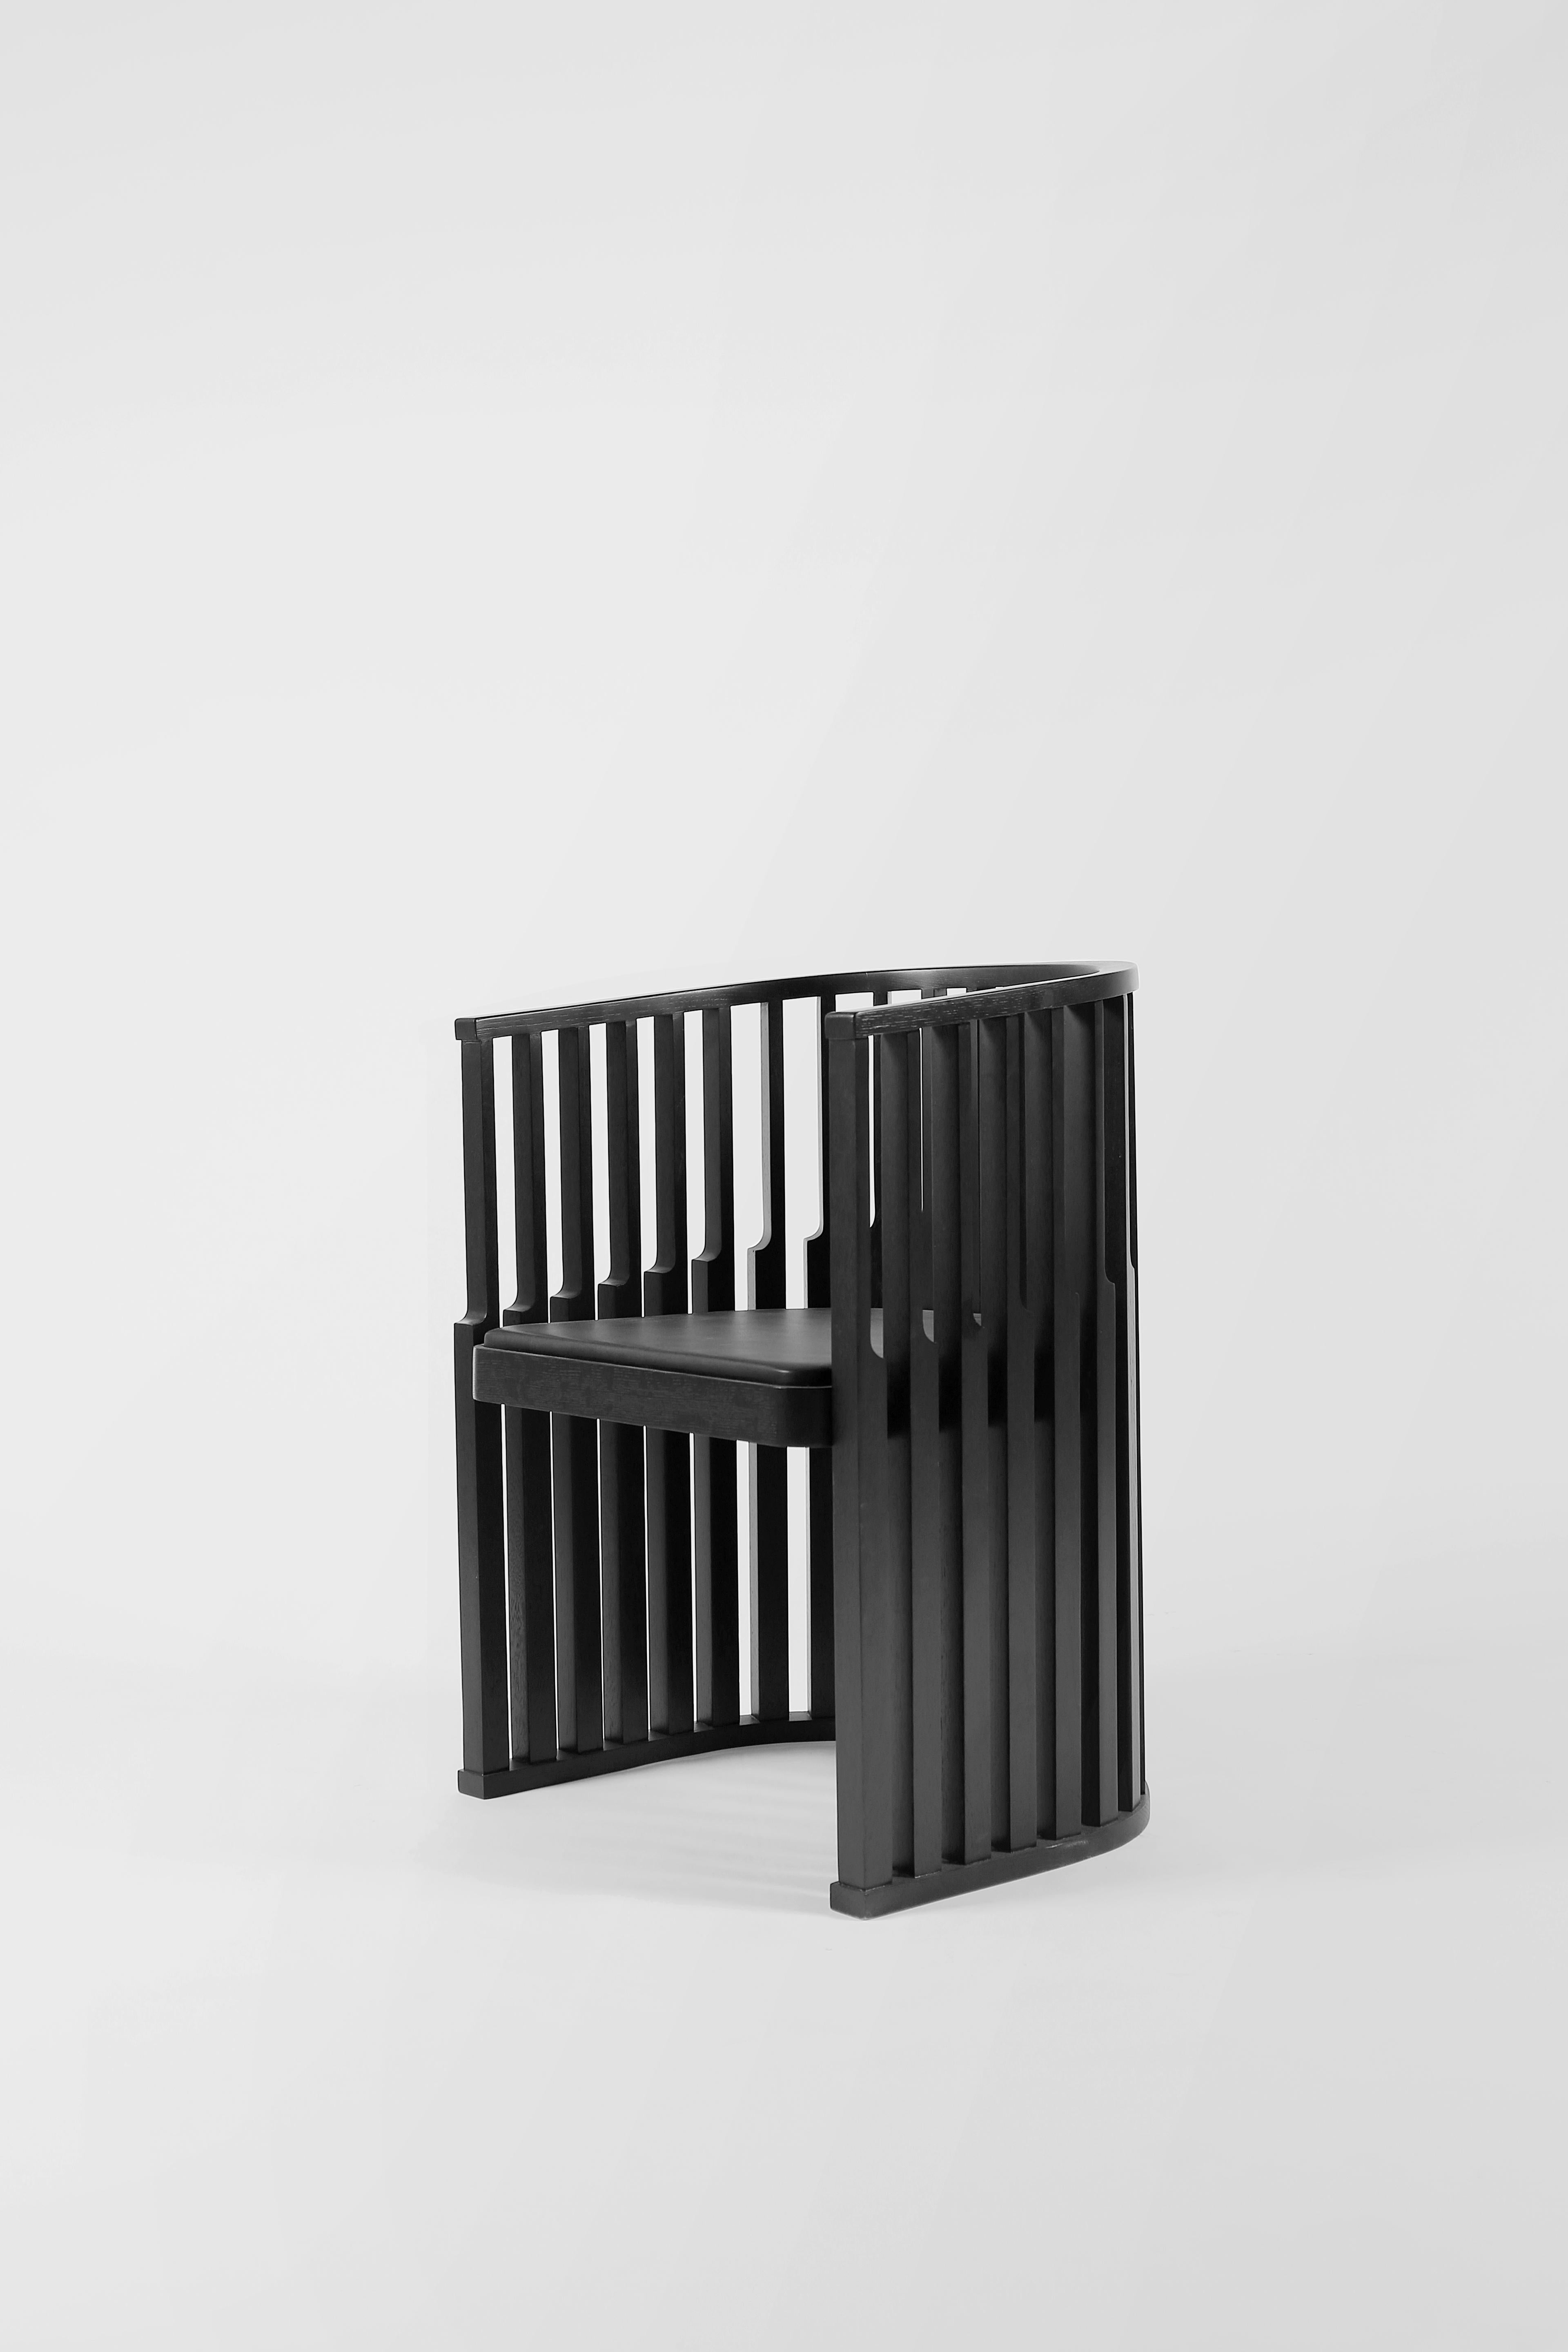 Black Aceleración chair by Joel Escalona
Limited Edition of 9
Dimensions: D 52 x W 52 x H 72 cm
Materials: oak wood, leather.

Chair made of natural white oak with a burnt finish and leather seat.

Joel Escalona
He was born in Mexico City